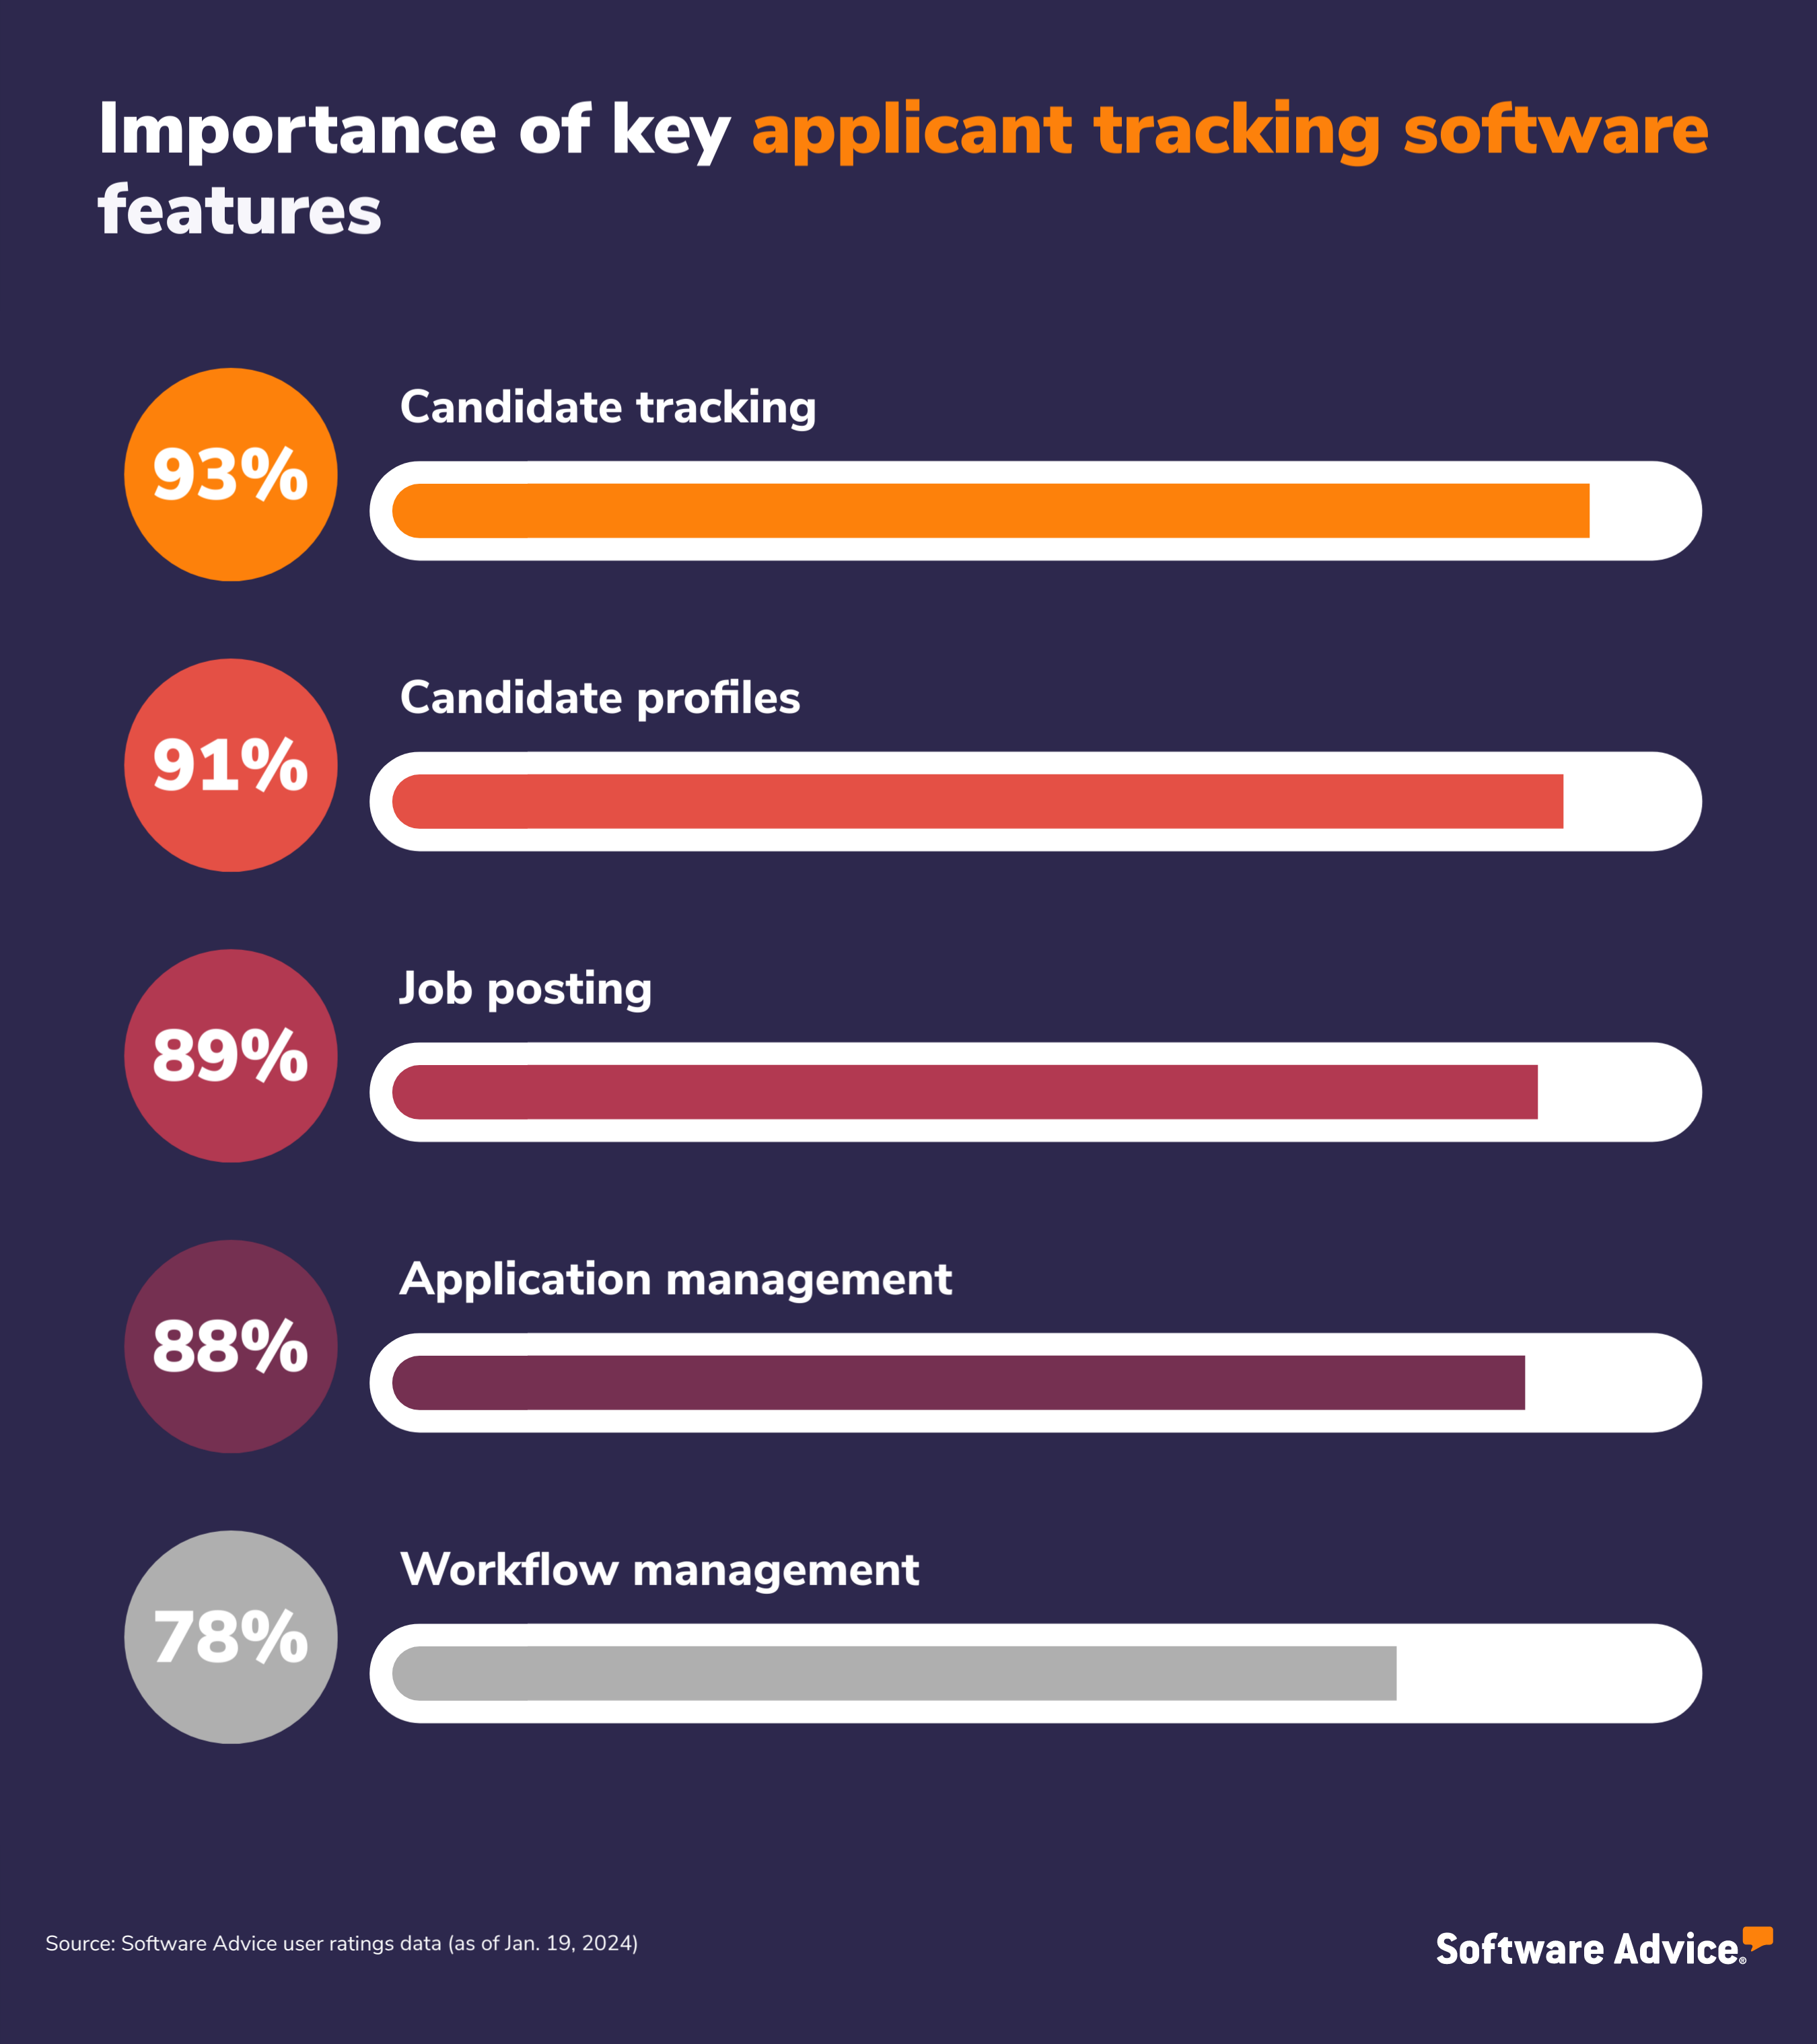 Key applicant tracking software features